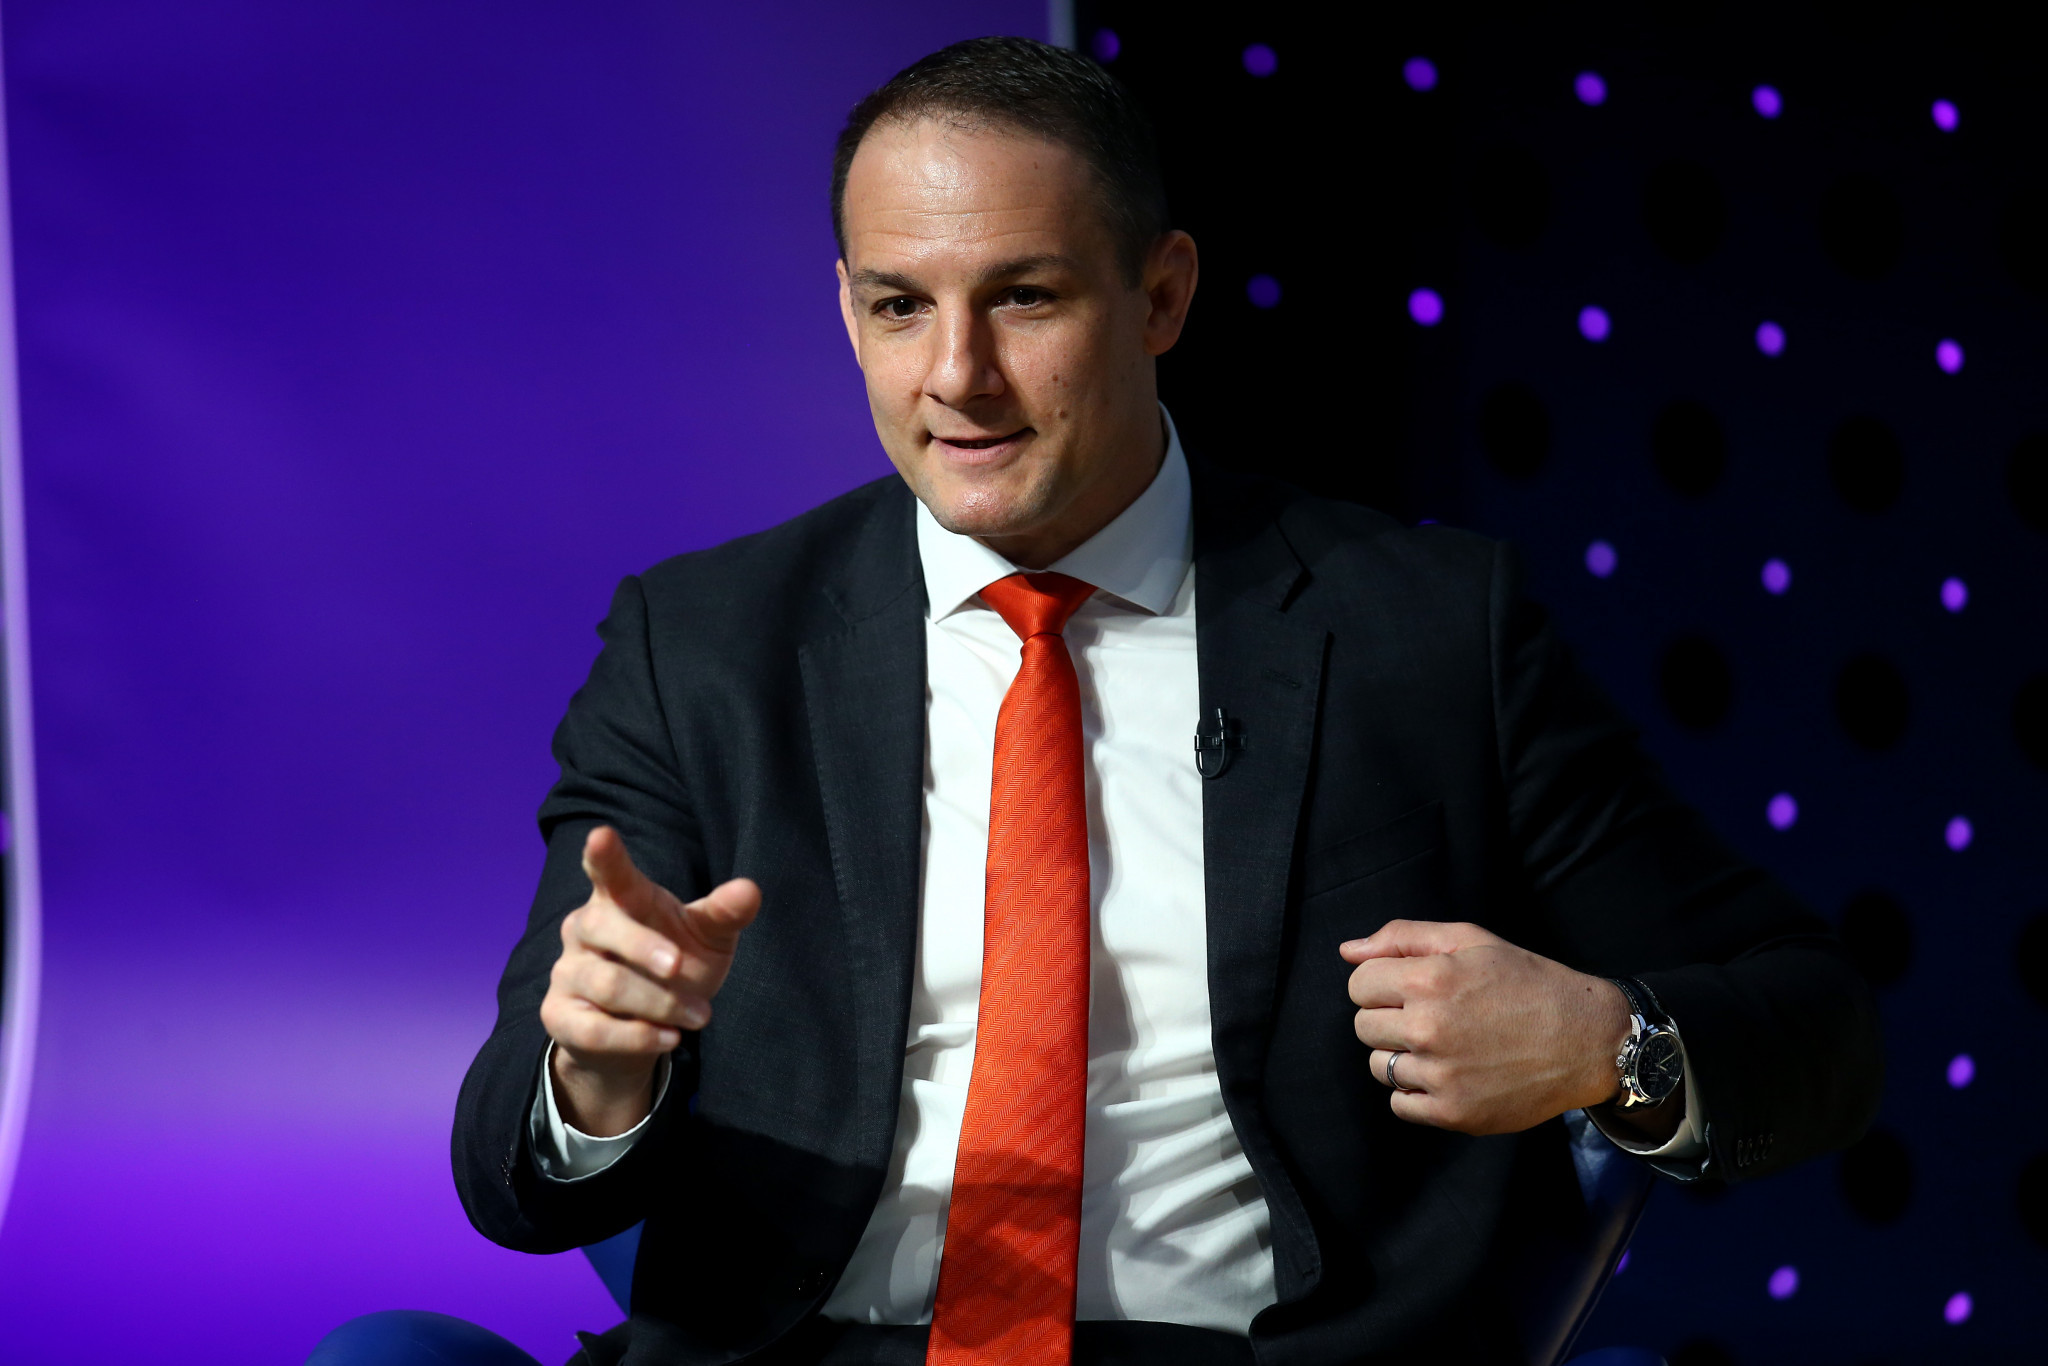 David Grevemberg, chief executive of the Commonwealth Games Federation, believes the Bill will enable the West Midlands to deliver a hugely successful multi-sport competition in 2022 ©Getty Images